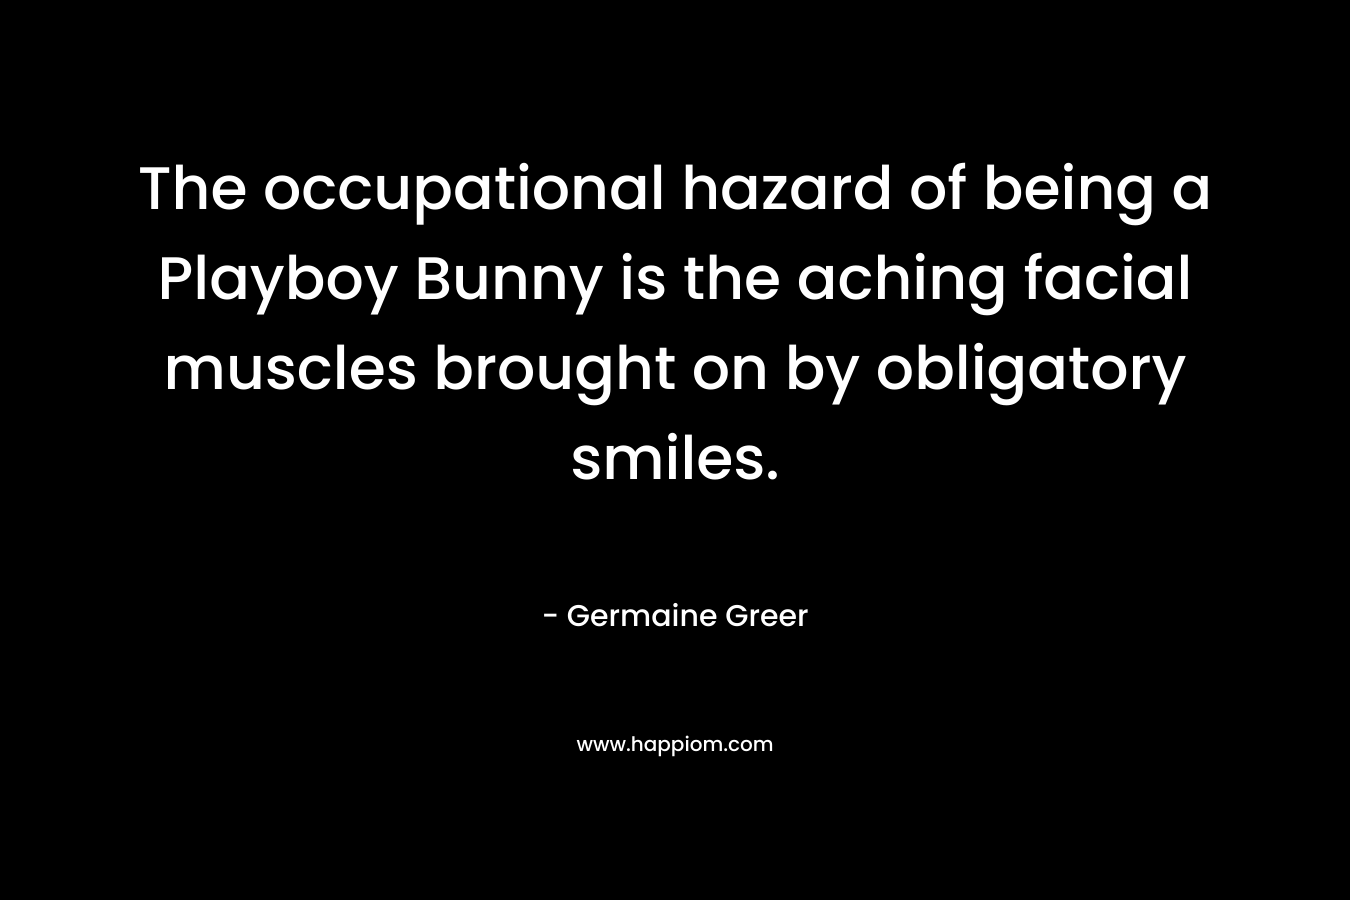 The occupational hazard of being a Playboy Bunny is the aching facial muscles brought on by obligatory smiles.